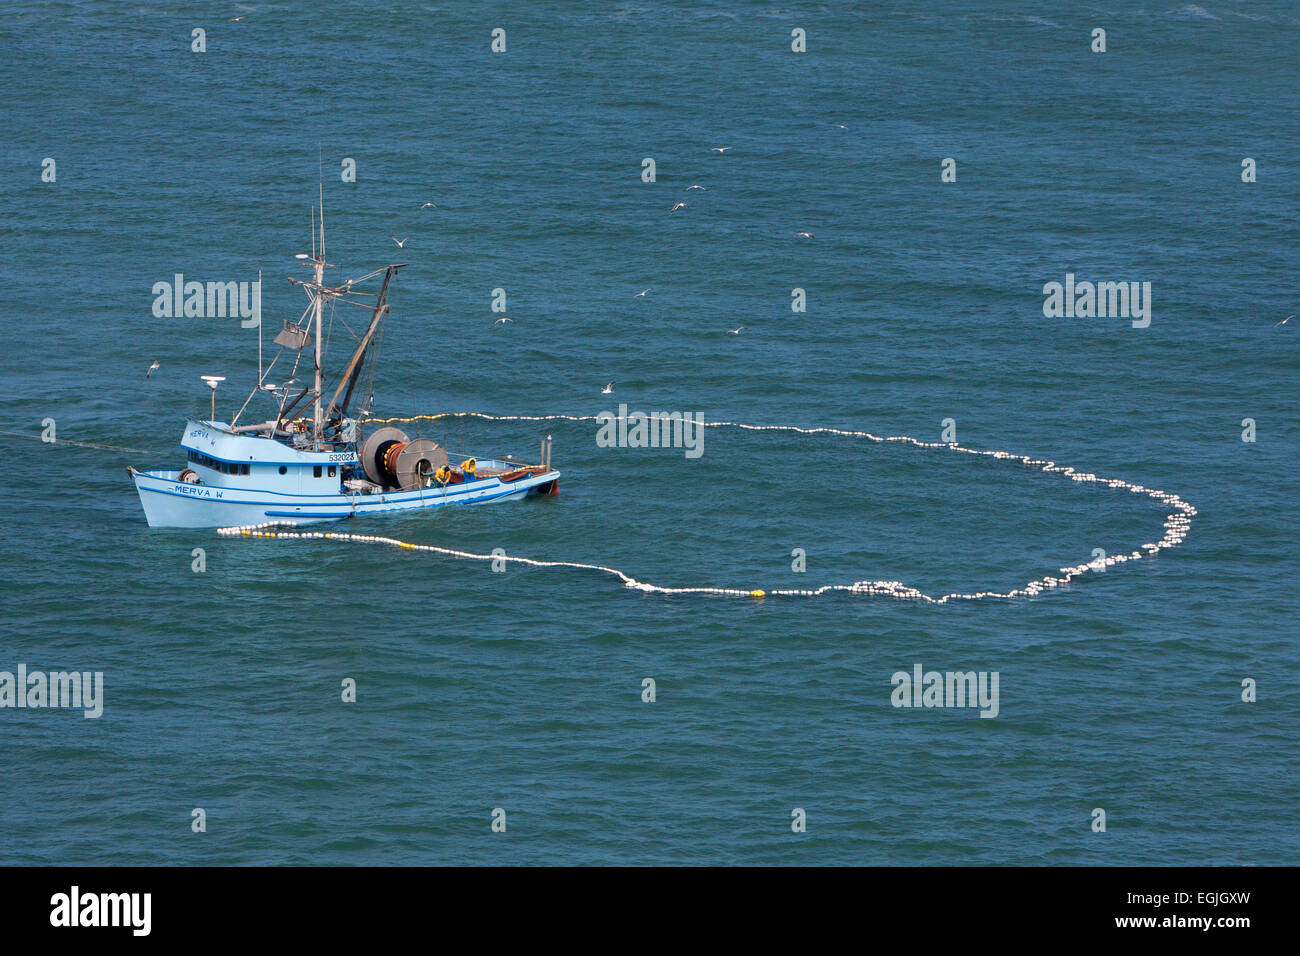 Anchovy fishing with net (purse seine) in a circle from boat in San Francisco Bay, California, USA in June Stock Photo